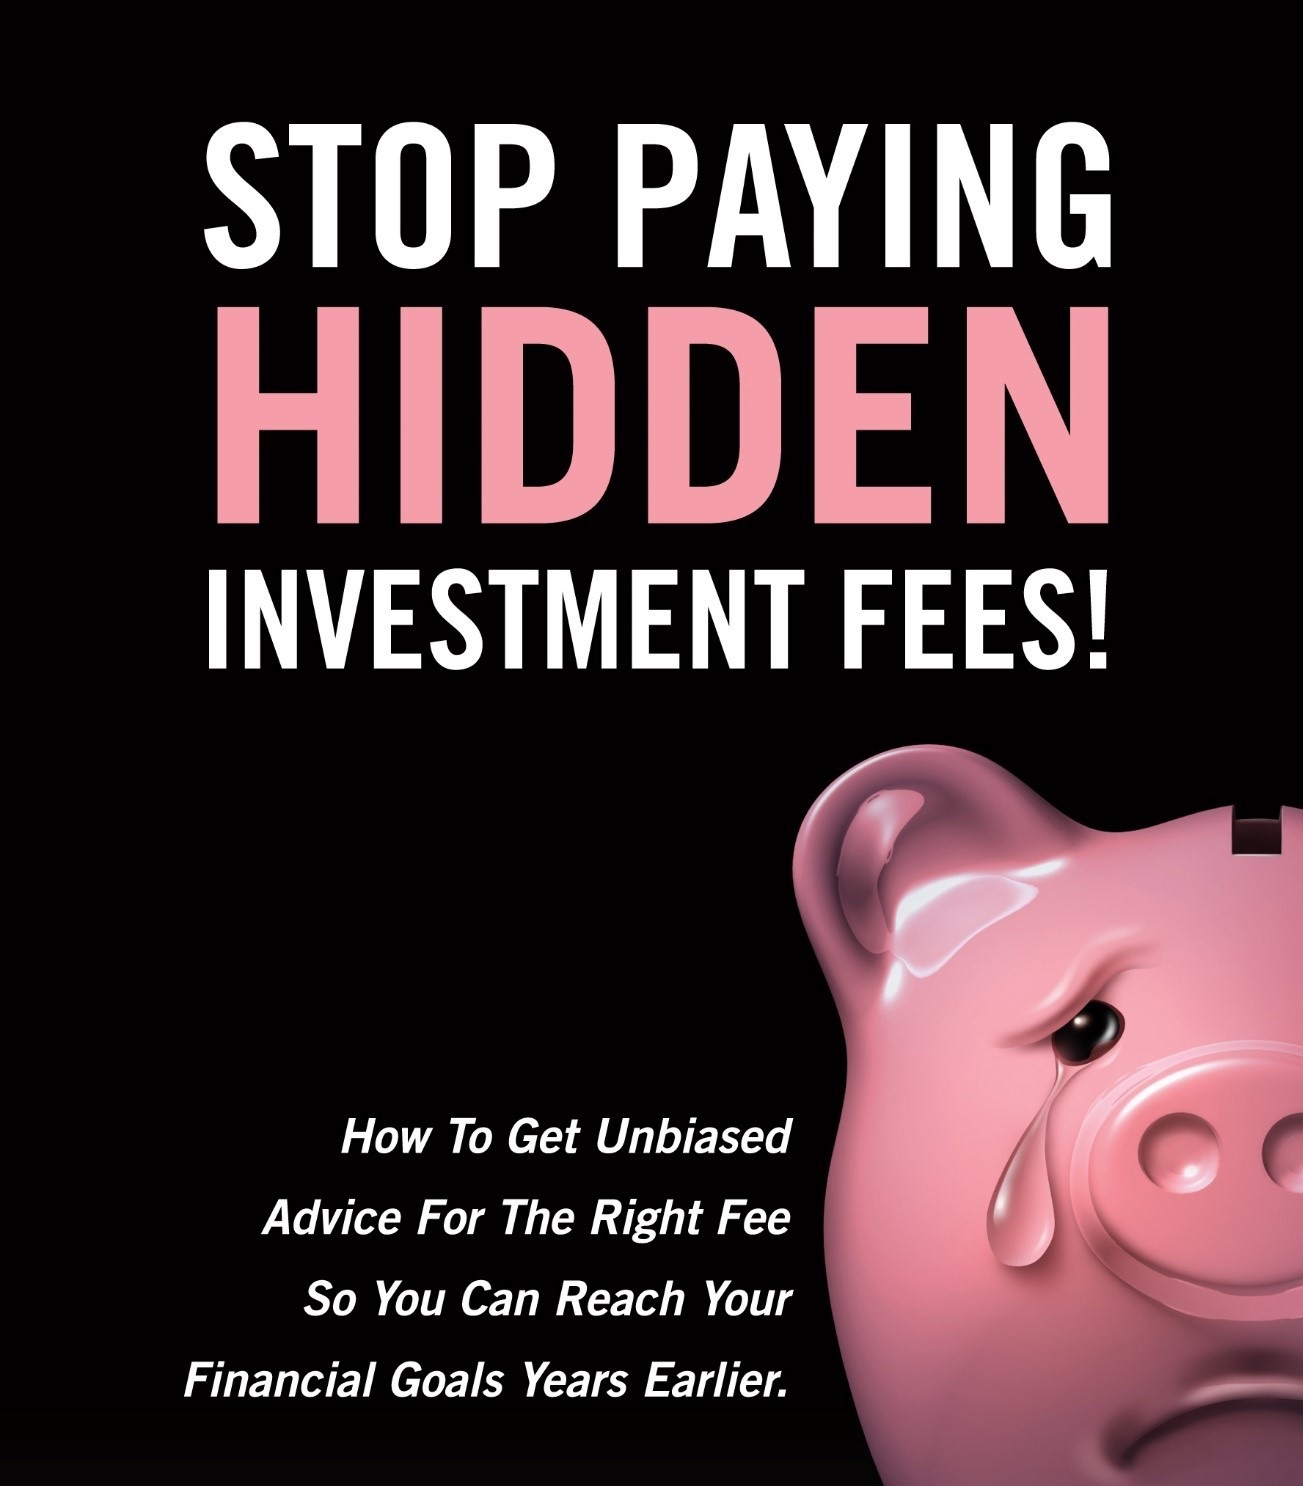 Stop Paying Hidden Investment Fees cover image for events v3